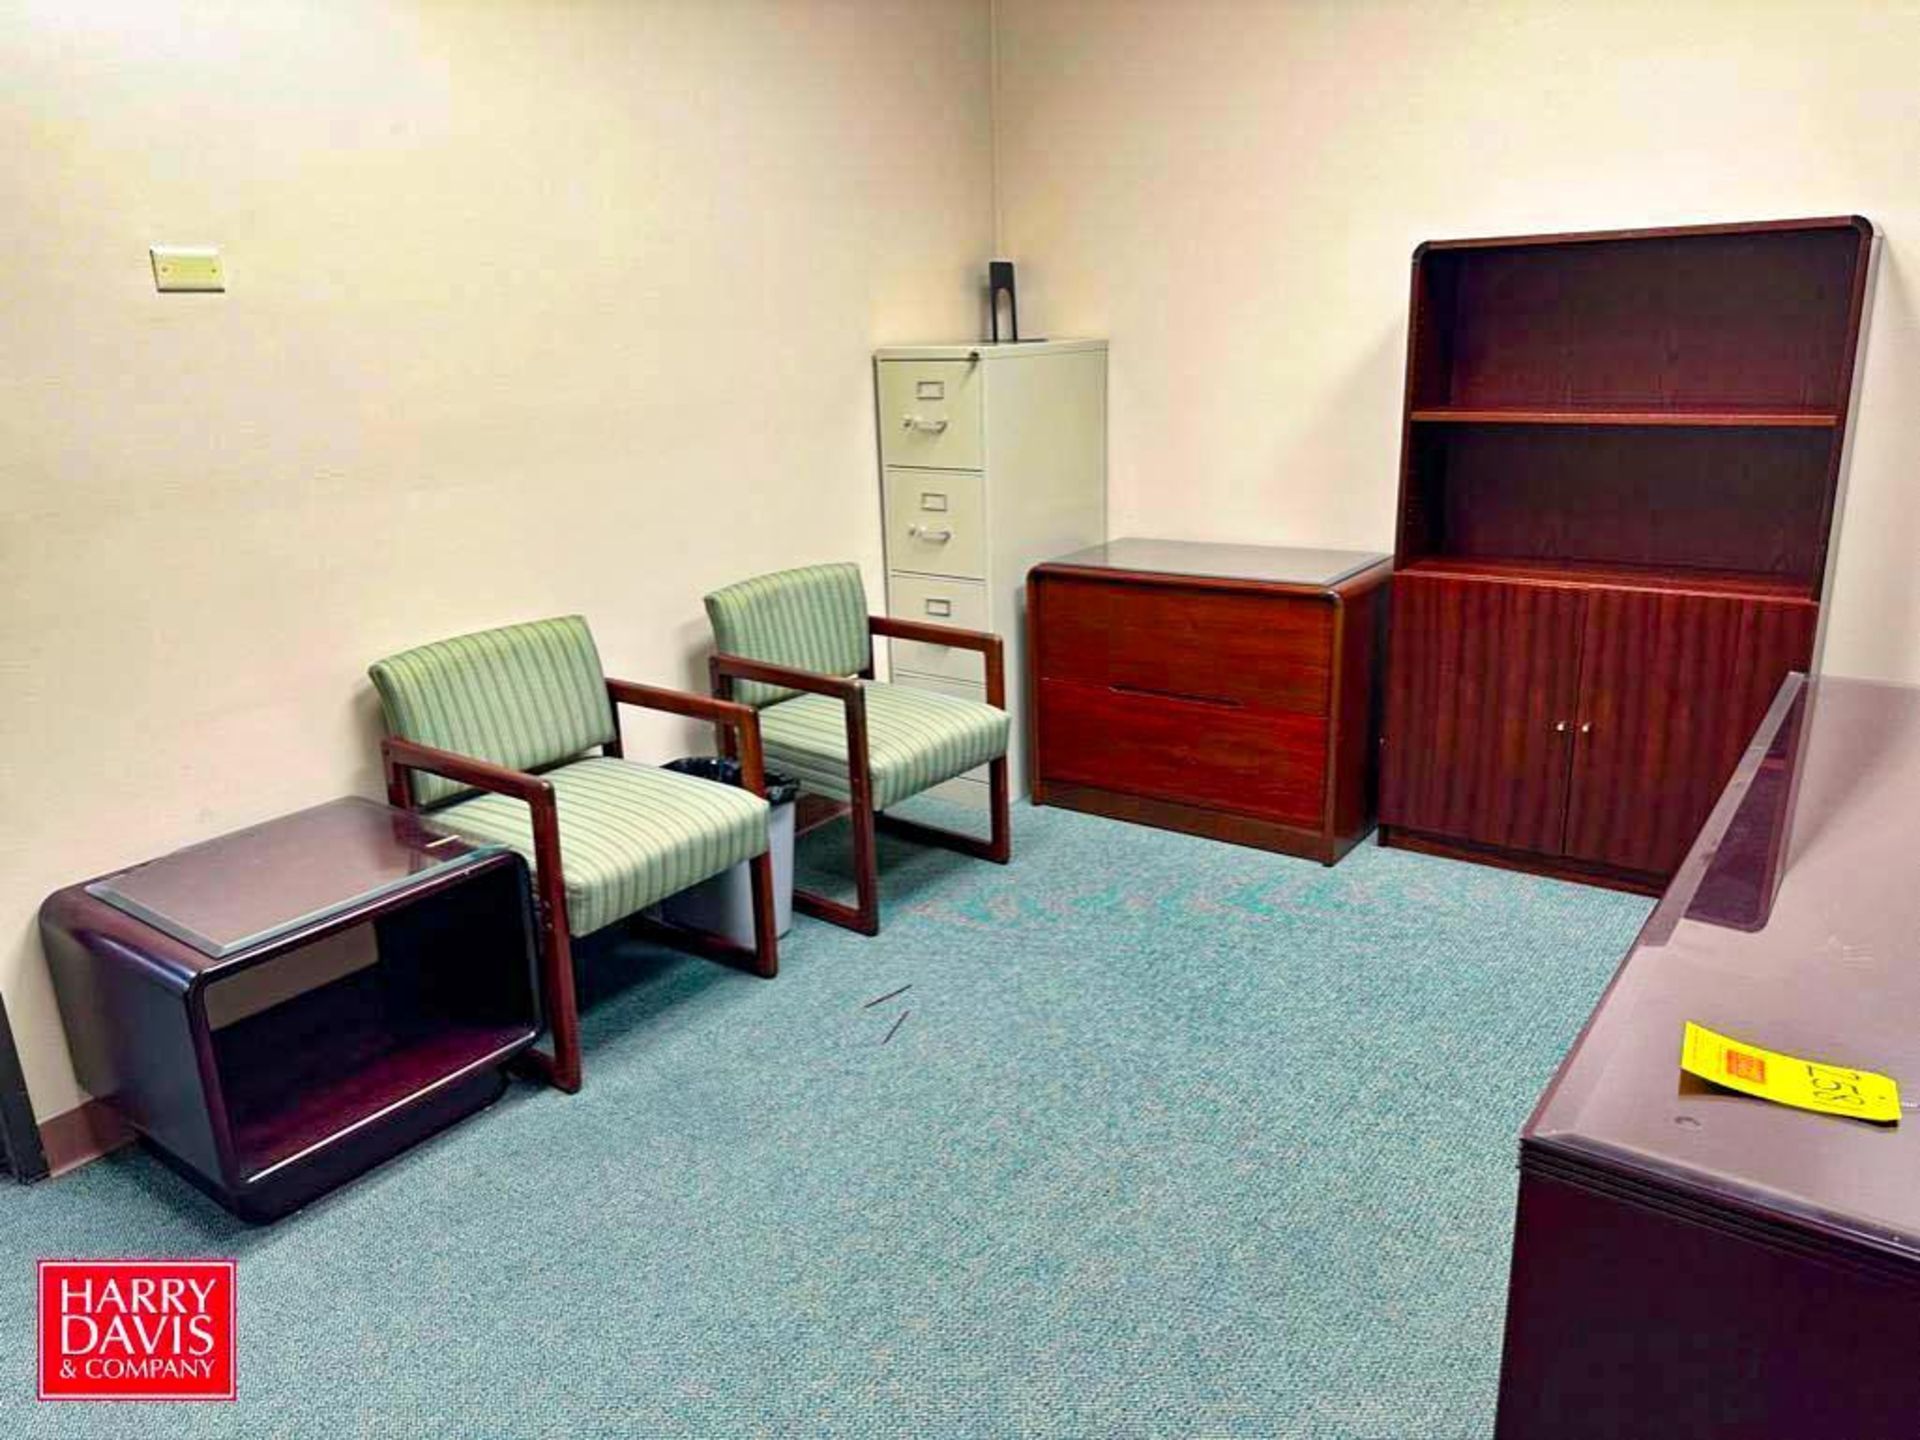 L-Shaped Desk, Lateral File Cabinet, Bookcase, 4-Drawer File Cabinet, Chairs and Monitors - Rigging - Image 2 of 2